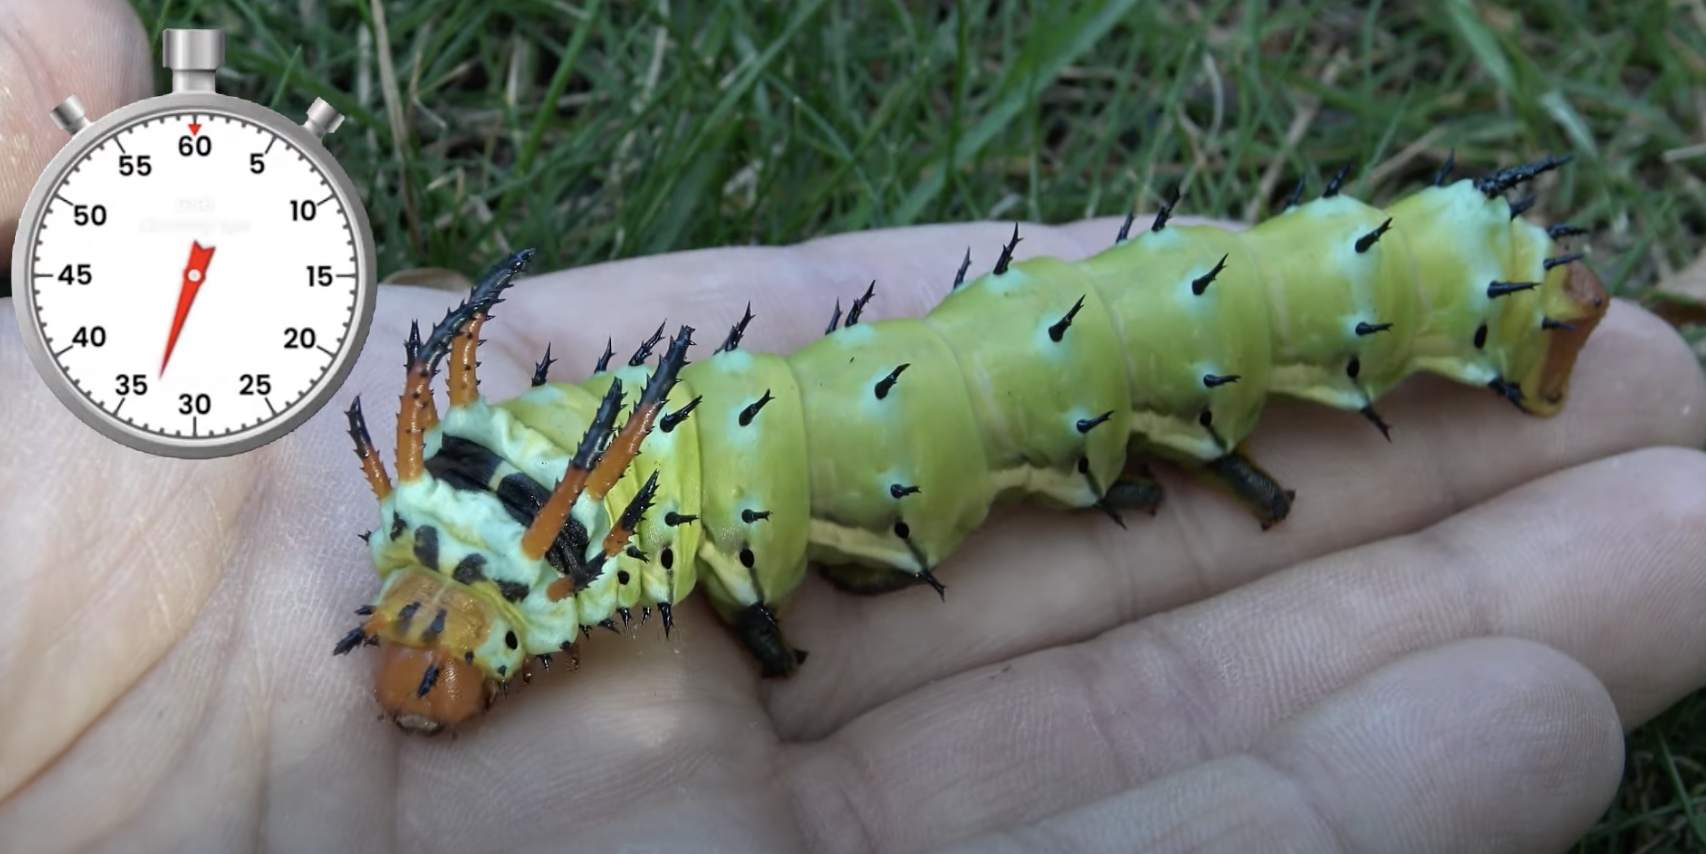 large caterpillar on a hand that looks like it has a small dragon face and a horned body